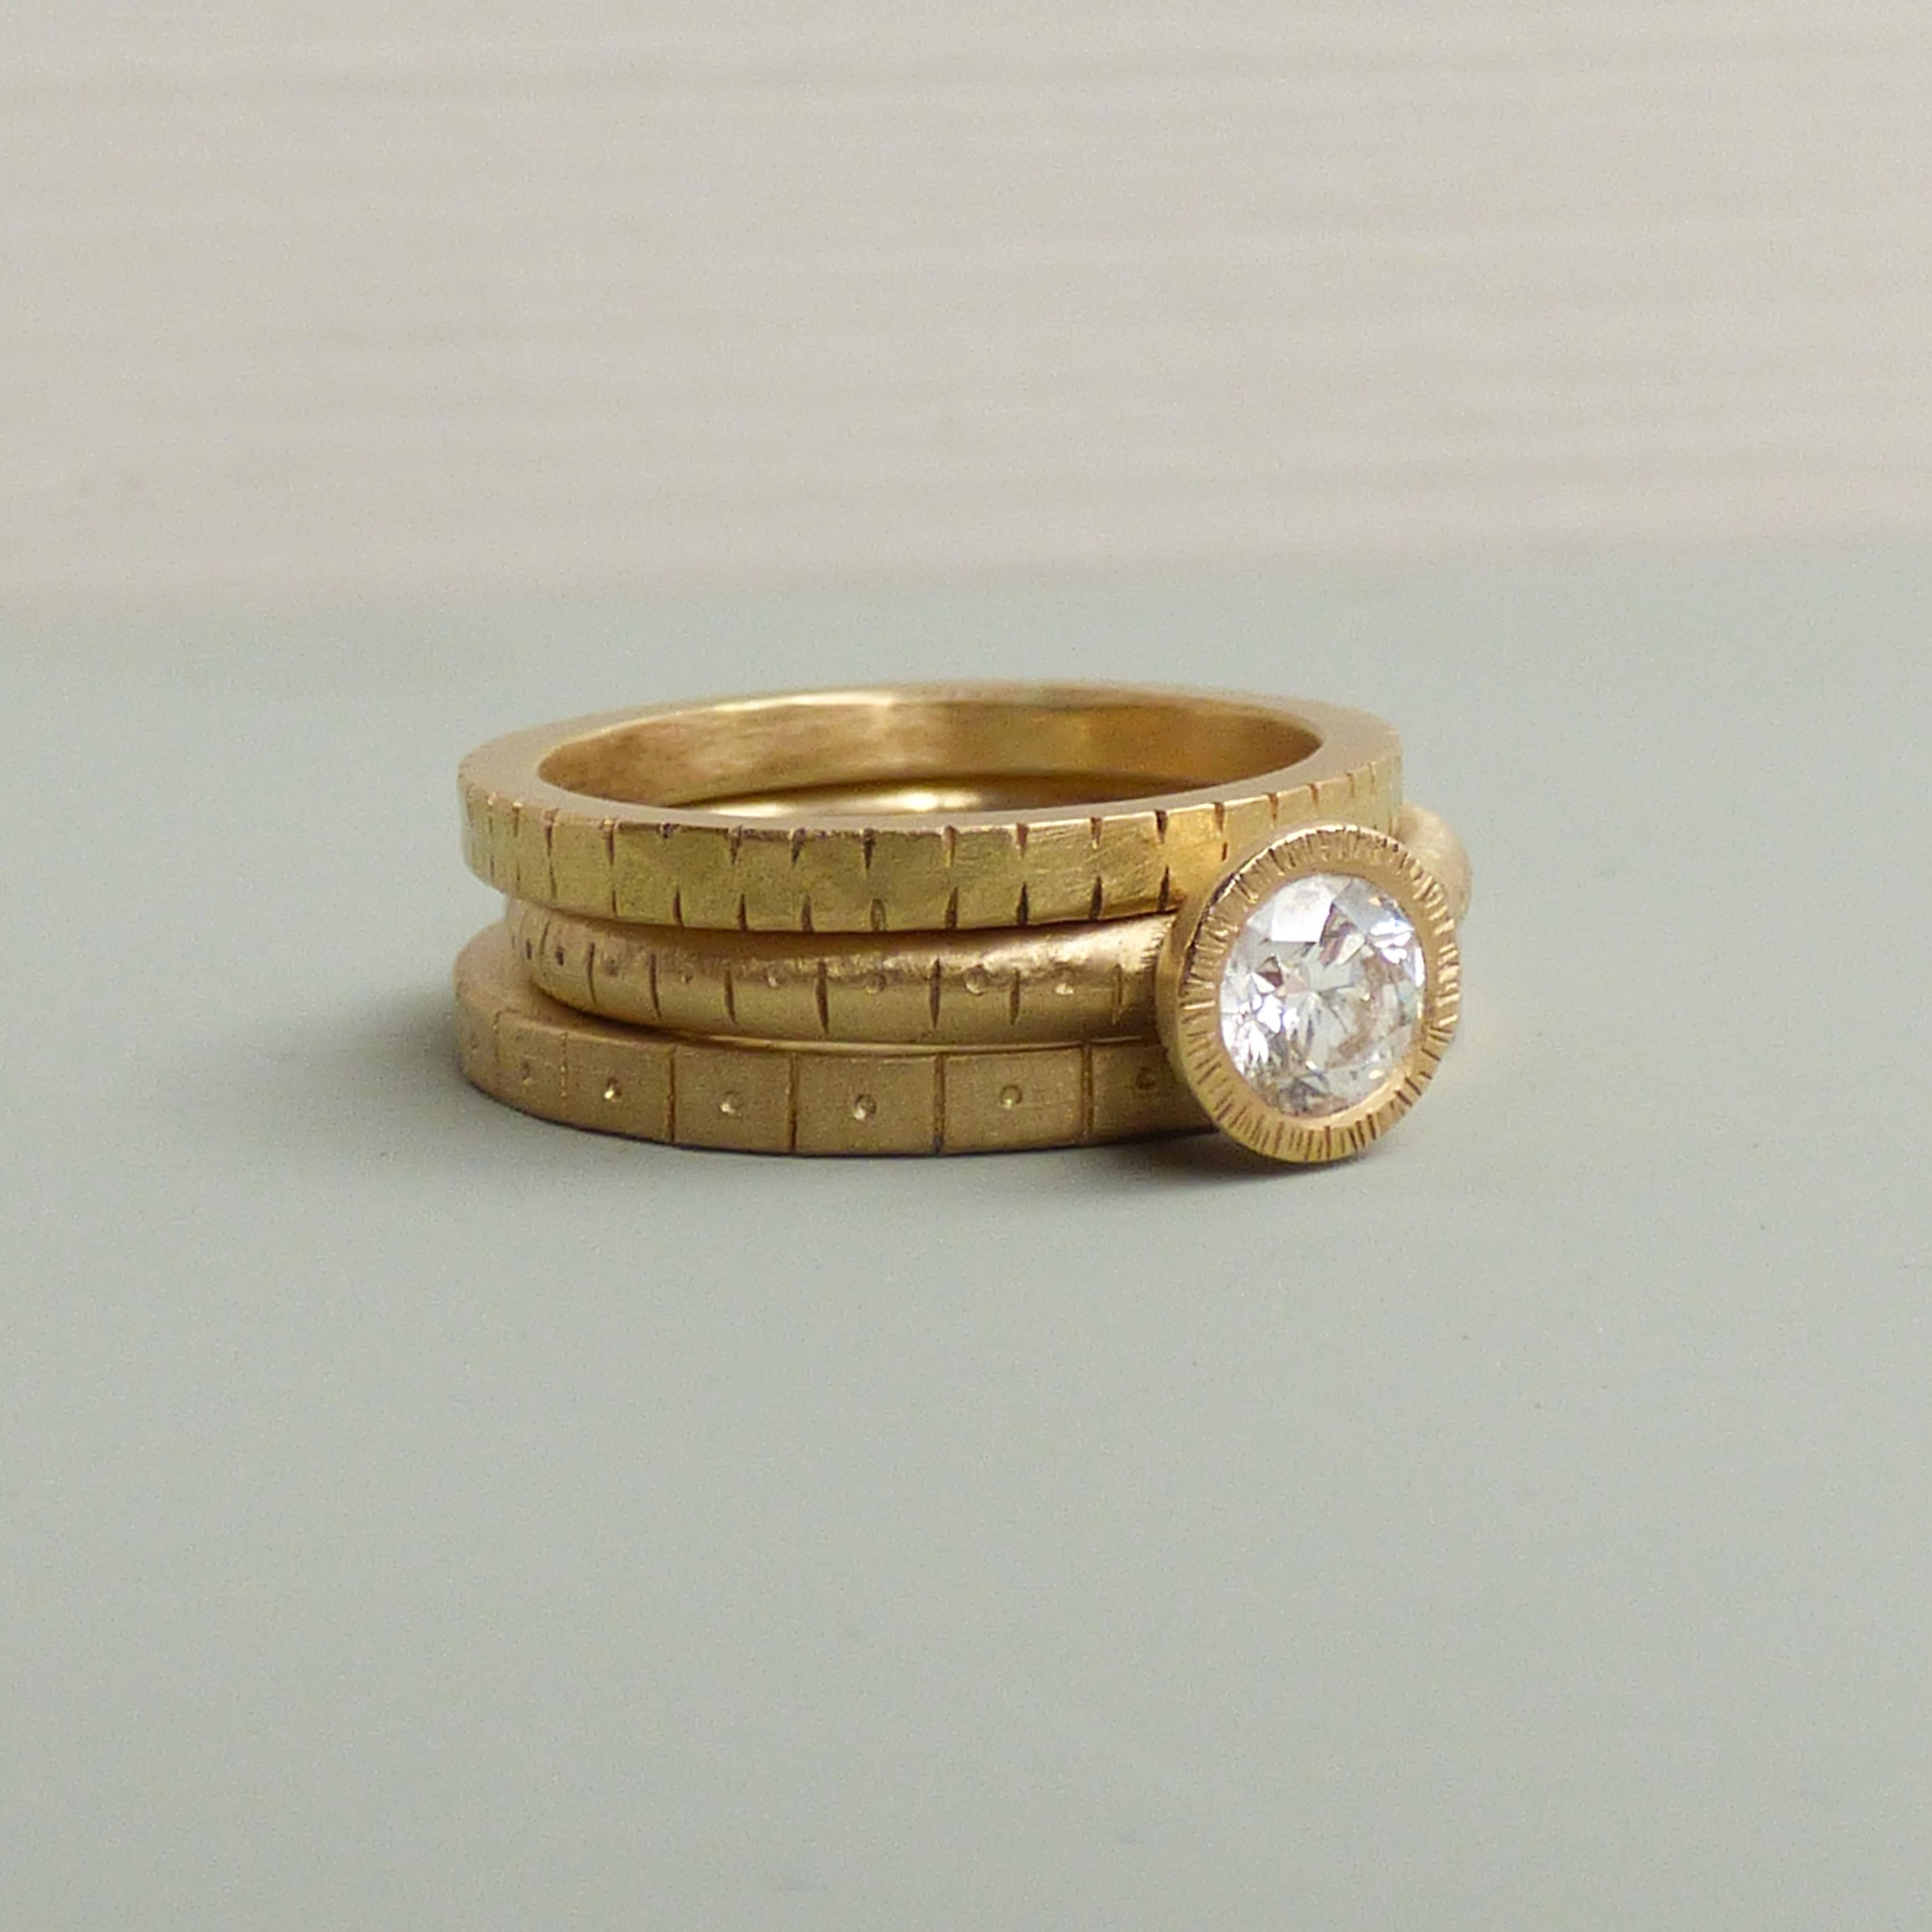 For Sale:  The Callie Ethical Engagement Ring CanadaMark 0.4 carat Diamond 18ct Gold 2